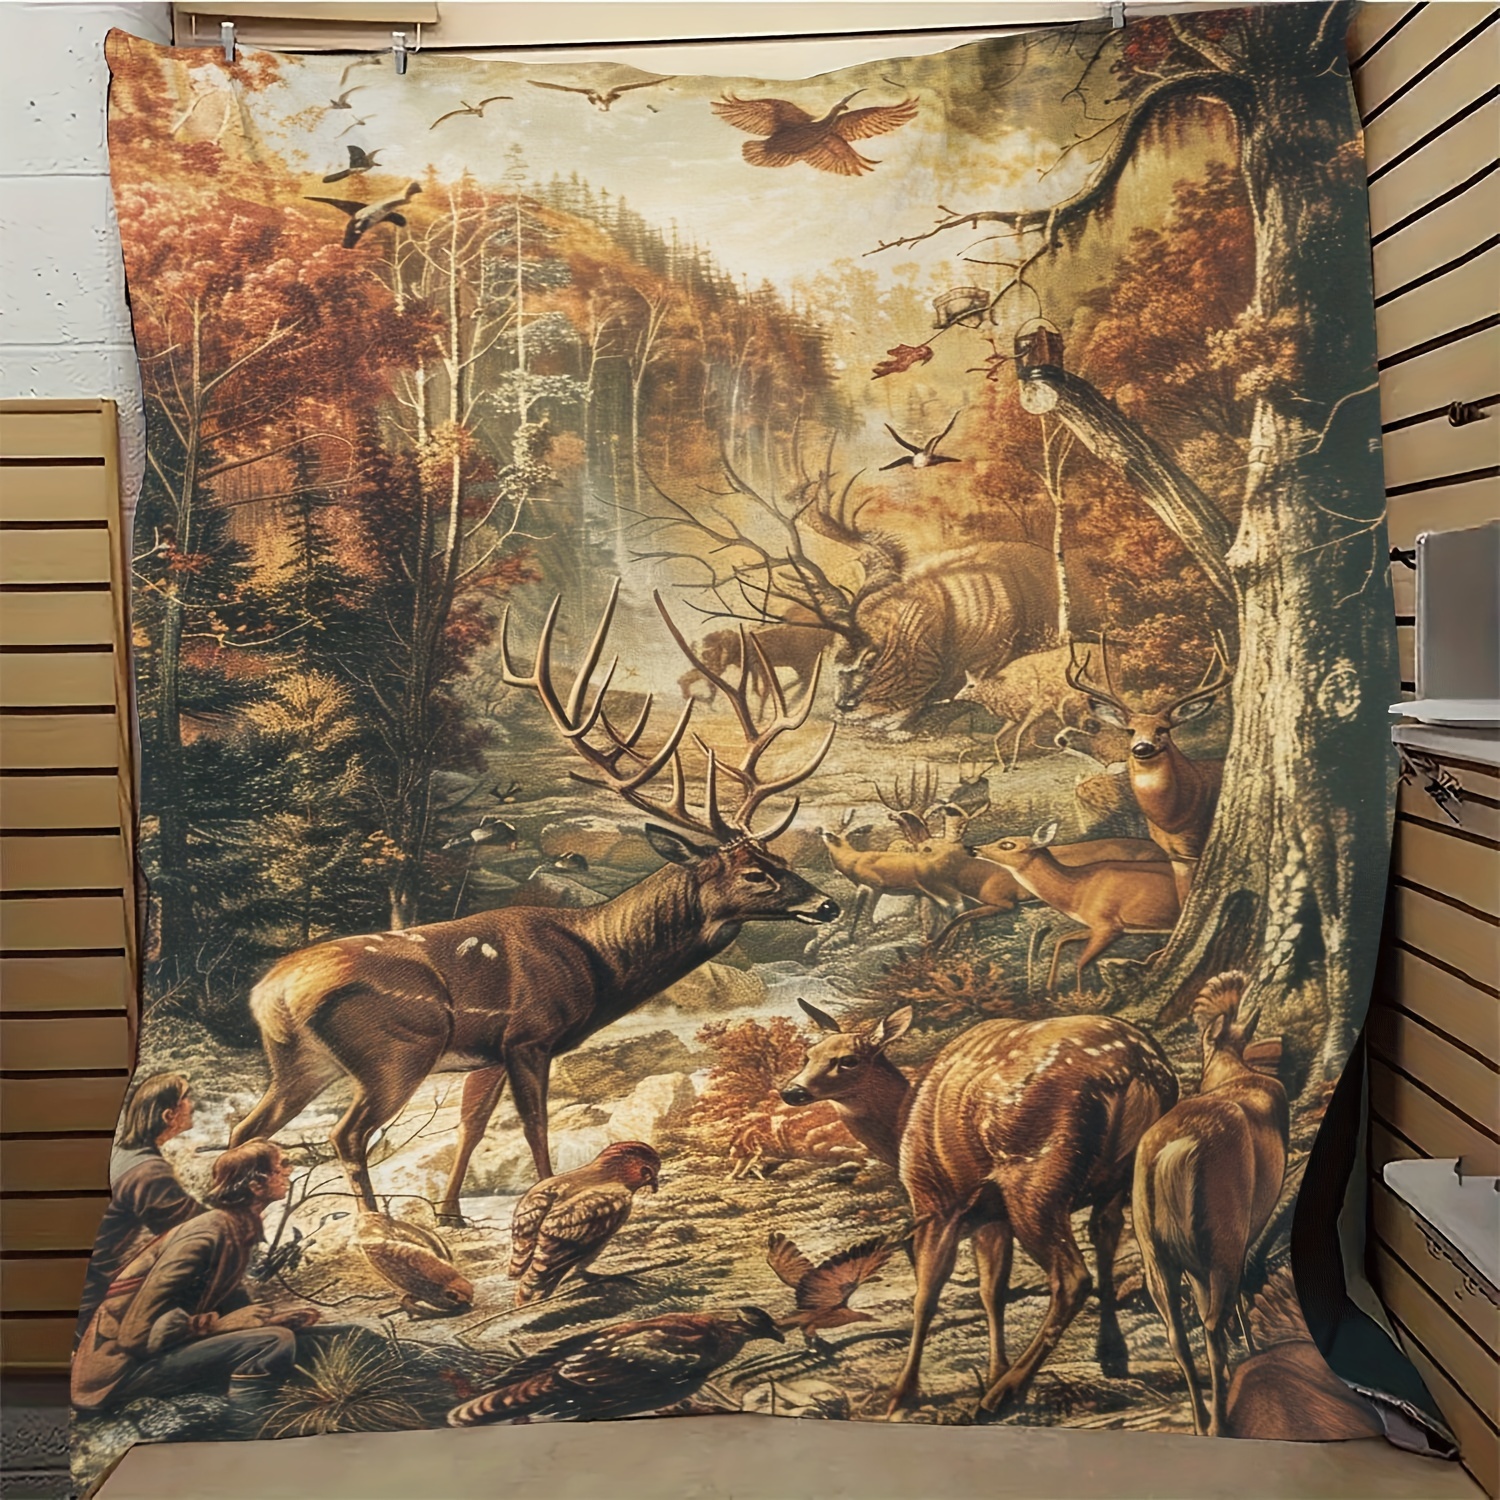 

1pc Gift Blanket For Friends Hunting Wild Elk Animal Soft Blanket Flannel Blanket For Couch Sofa Office Bed Camping Travel, Multi-purpose Gift Blanket For All Season